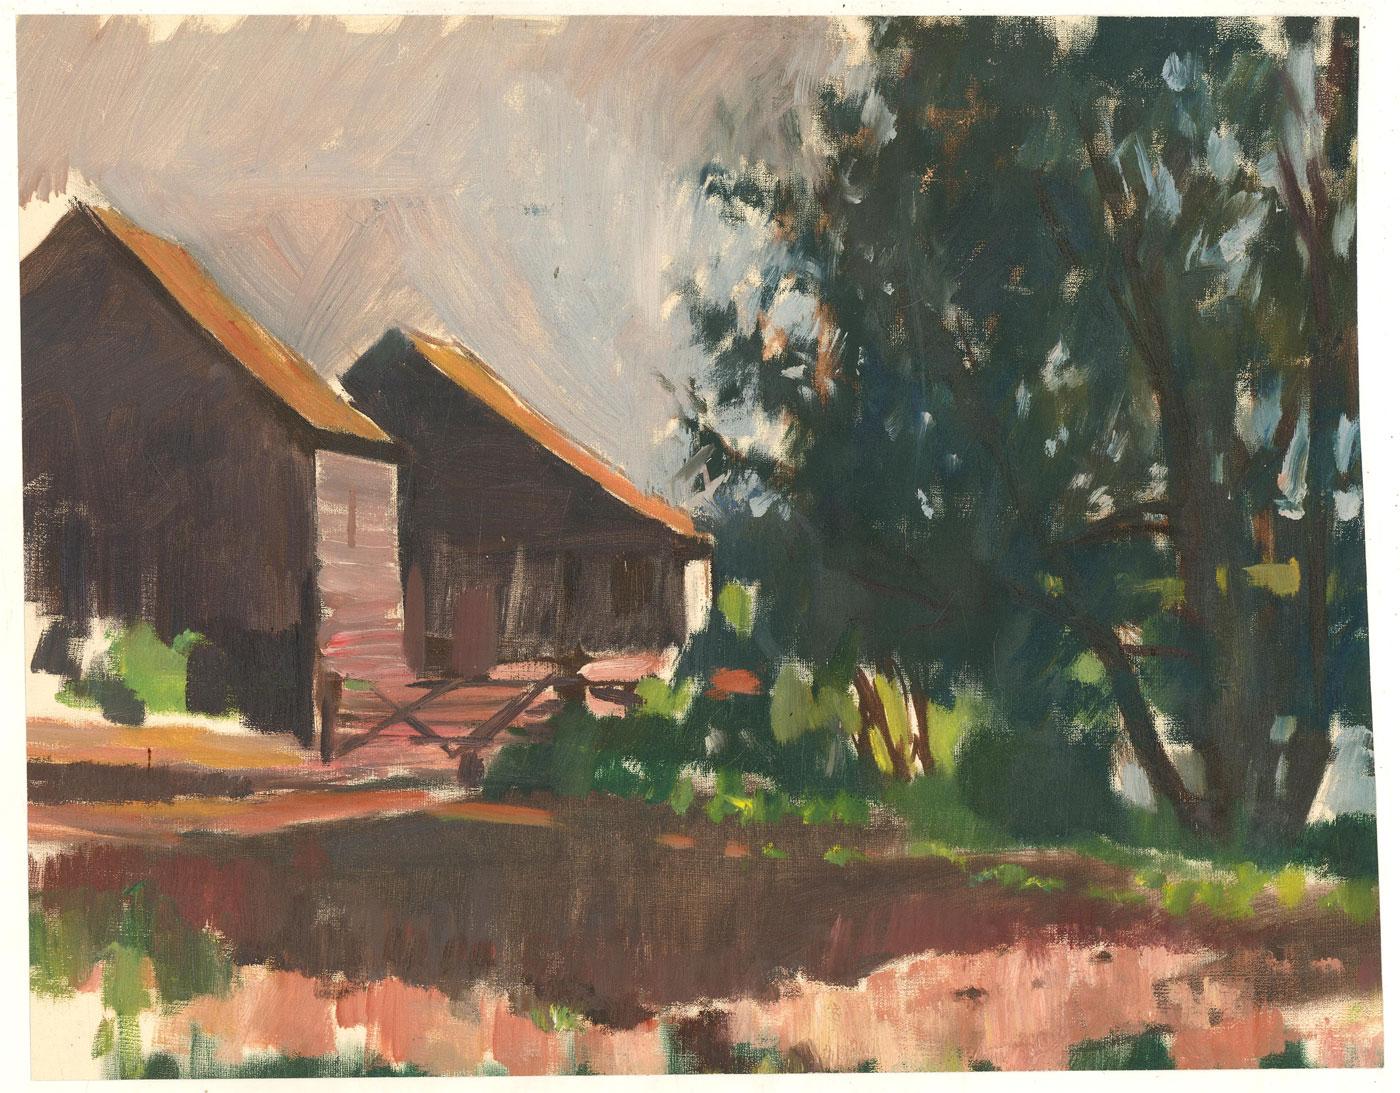 A deft and atmospheric oil showing a shaded patch of land with outbuildings beyond. With a warm, earthy palette the painting seems to be set in late Summer. The confident composition and assured brush strokes suggest a skilled hand. Artist's studio